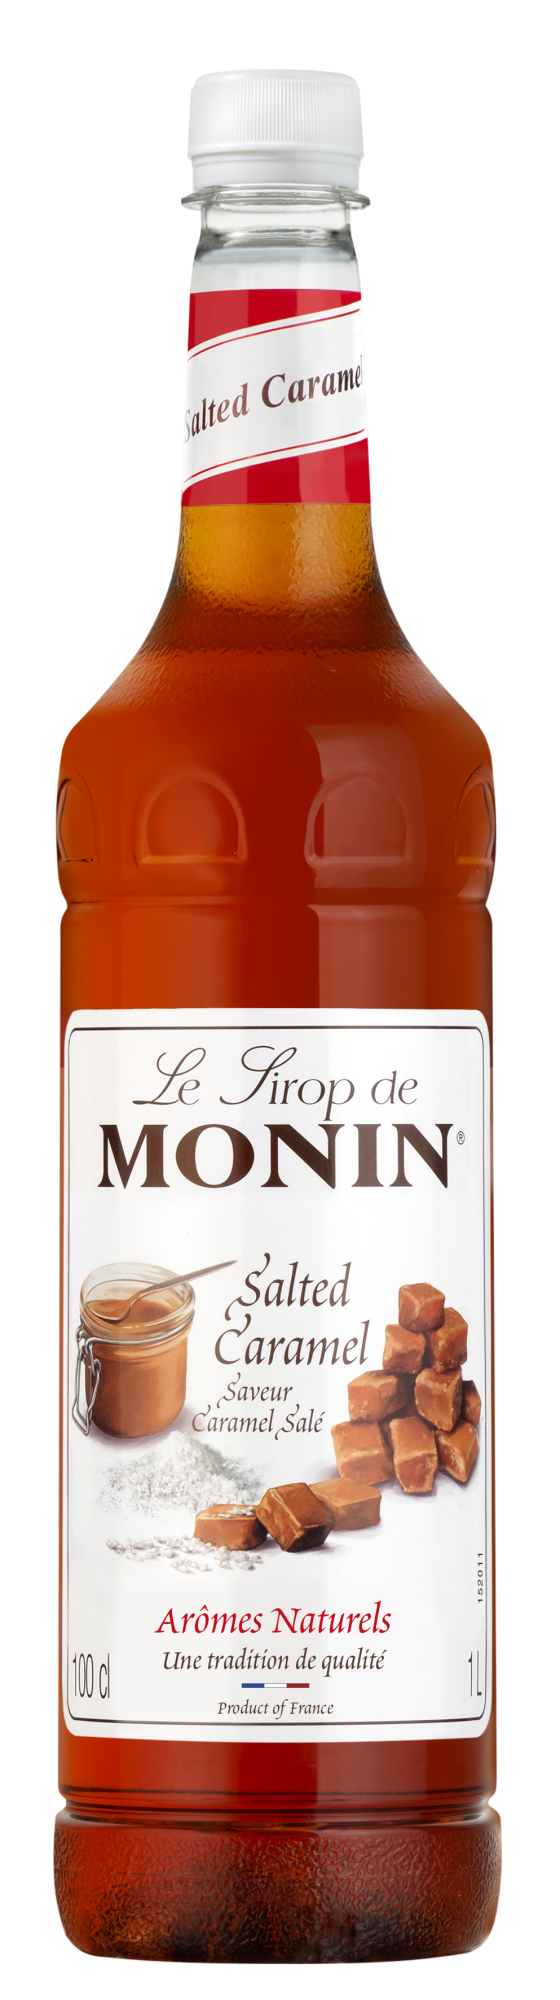 Buy MONIN Salted Caramel Syrup. It captures the perfect balance between smooth, silky caramel with a hint of sea salt.